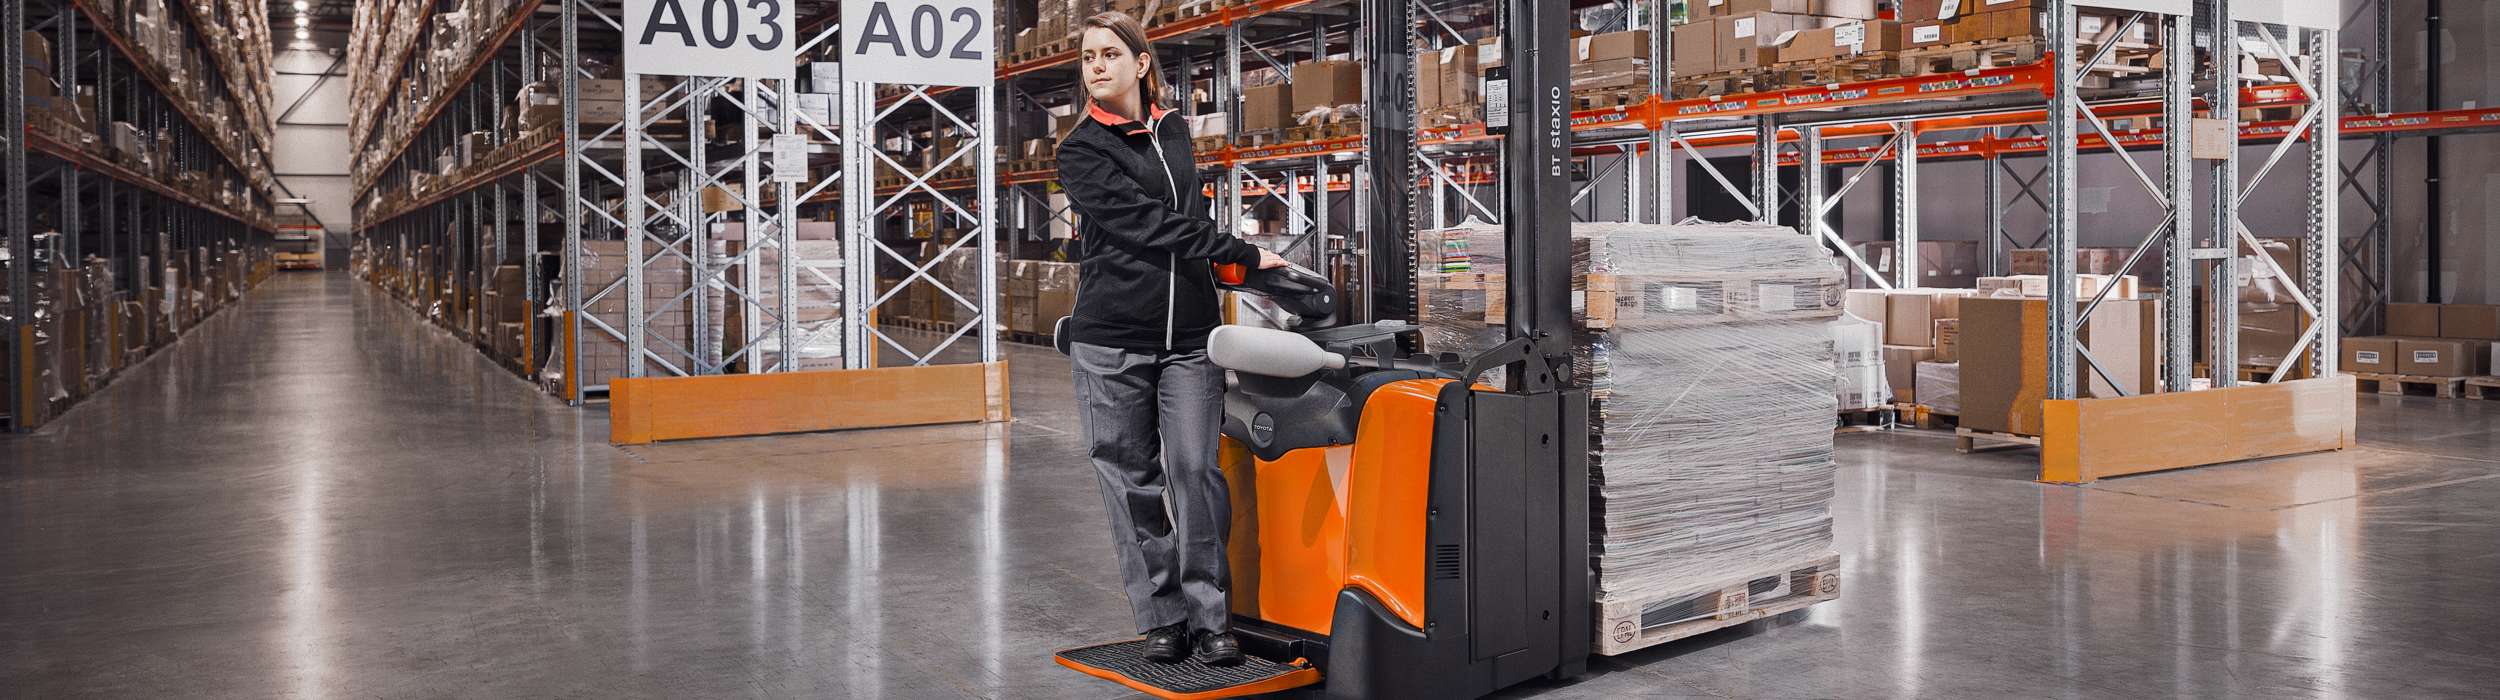 Woman driving a Staxio stacker in warehouse